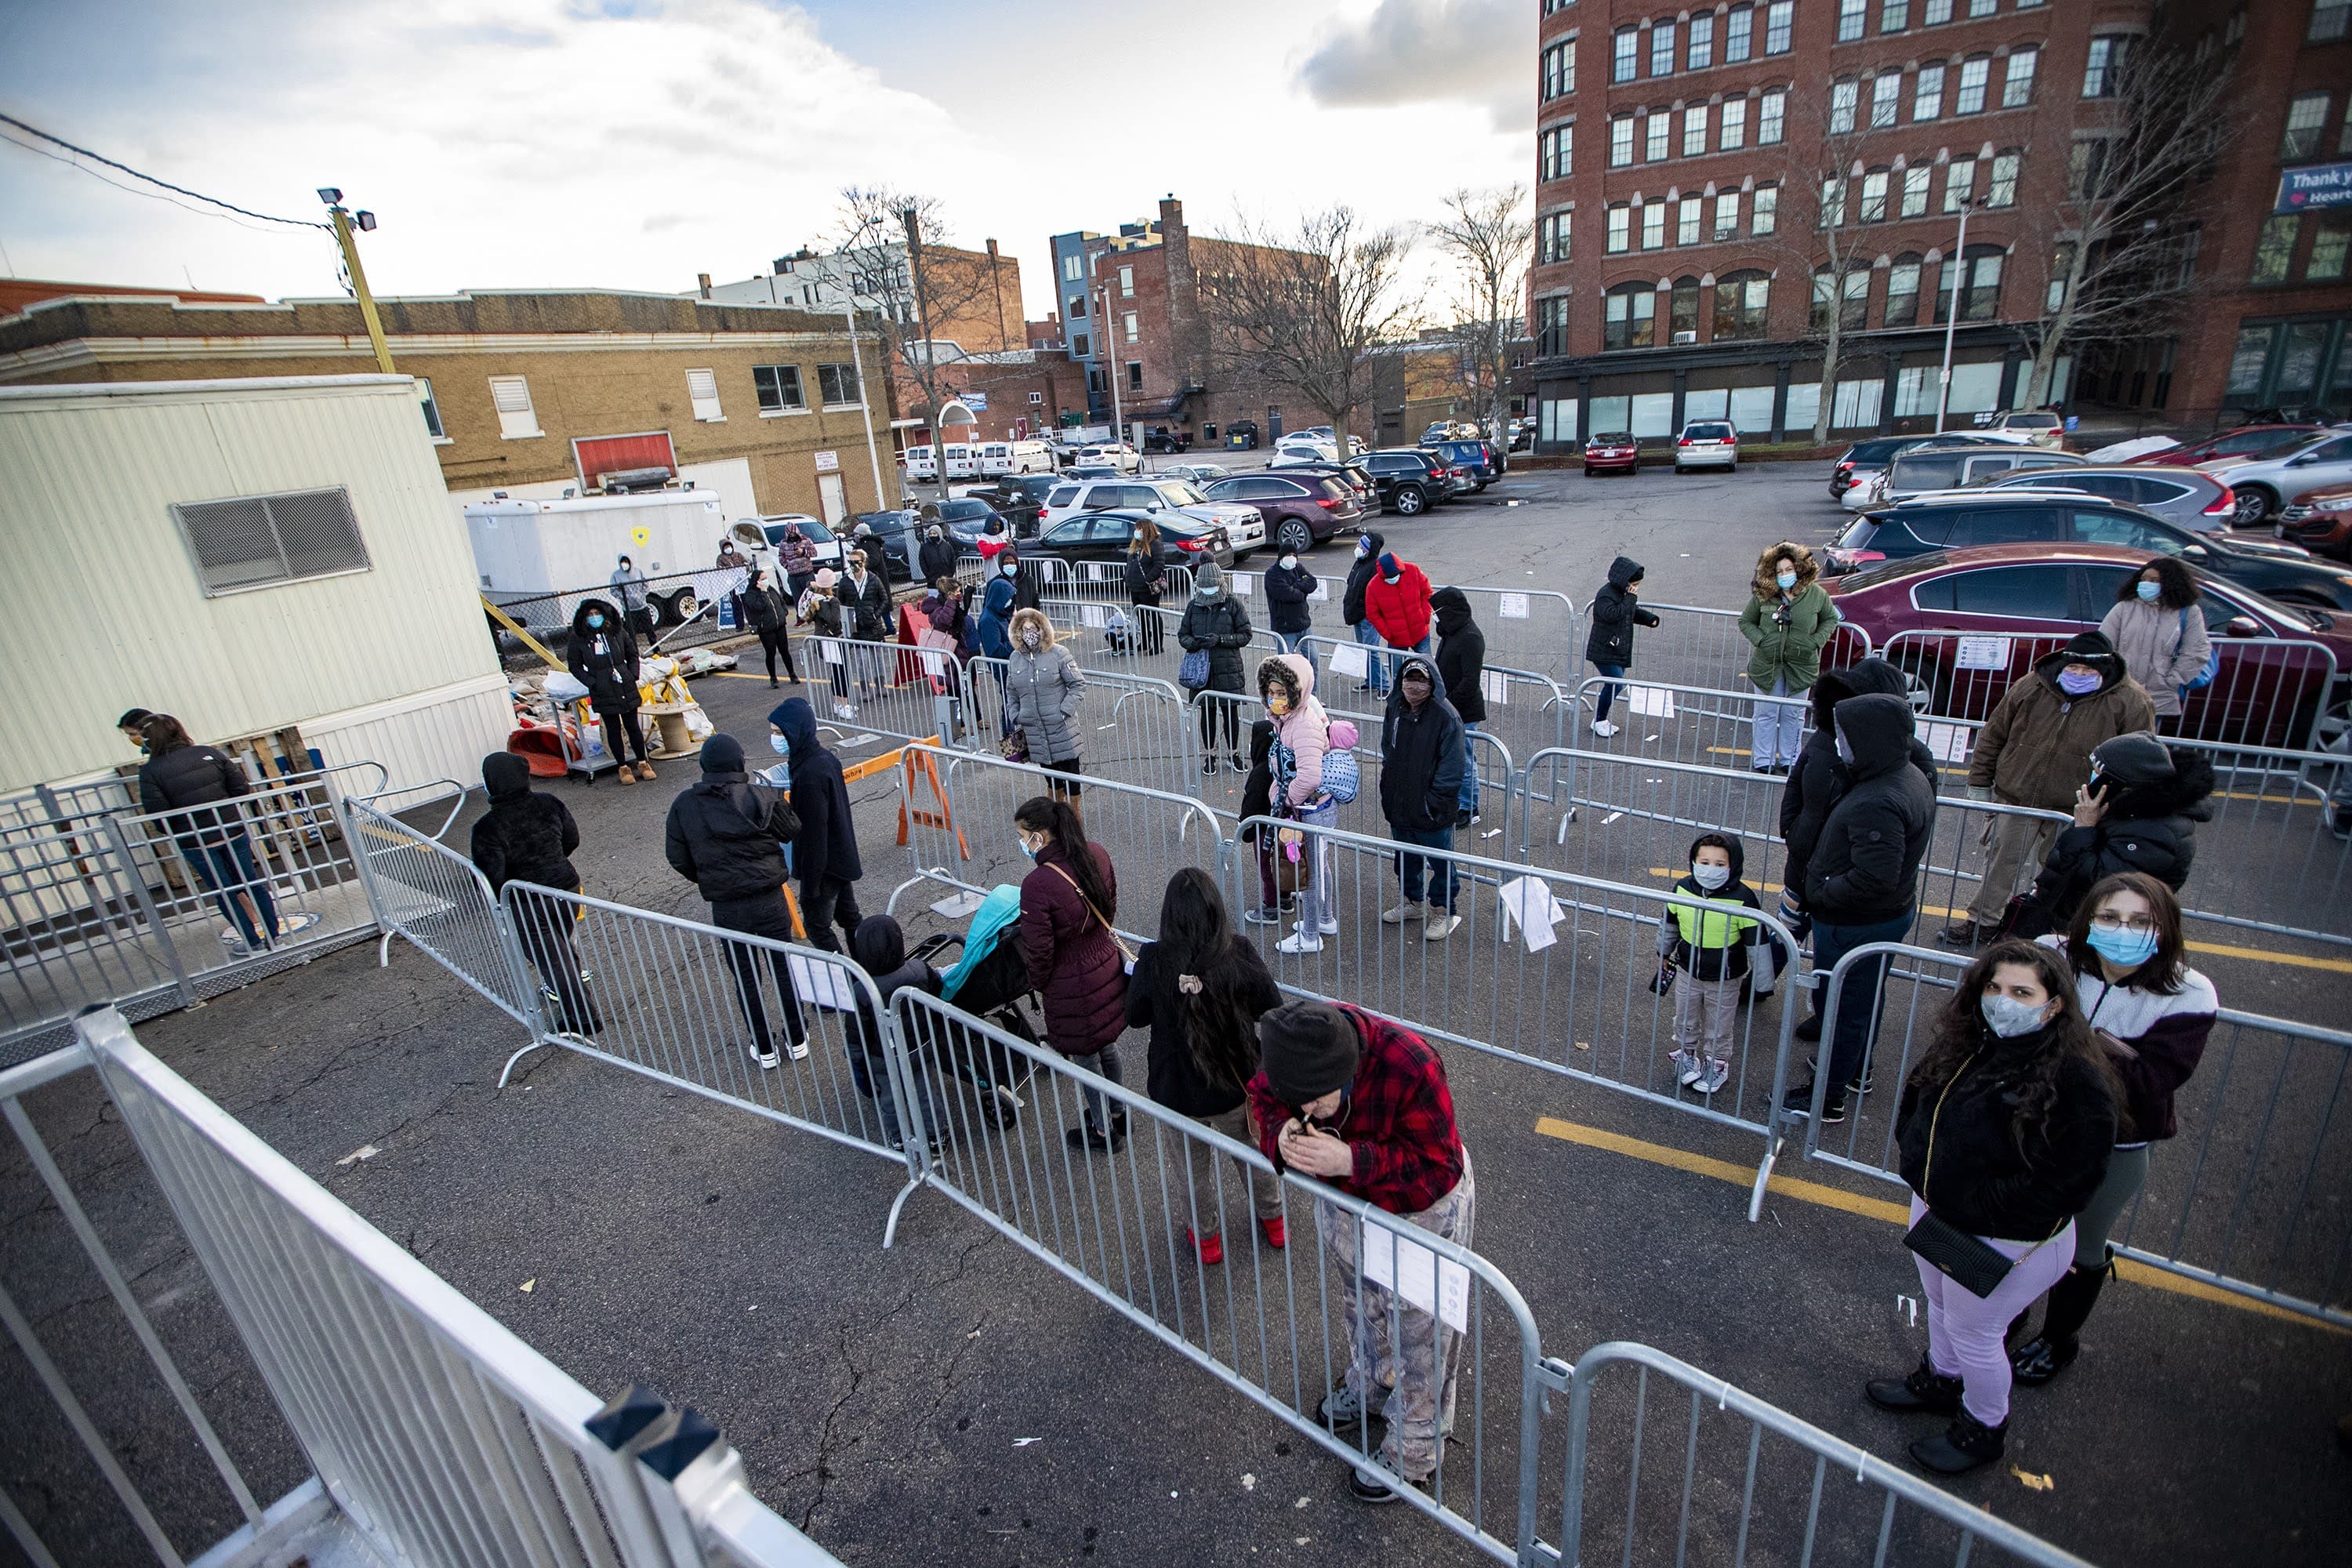 People wait in line for COVID-19 testing at the Lynn Community Health Center on Monday. (Jesse Costa/WBUR)